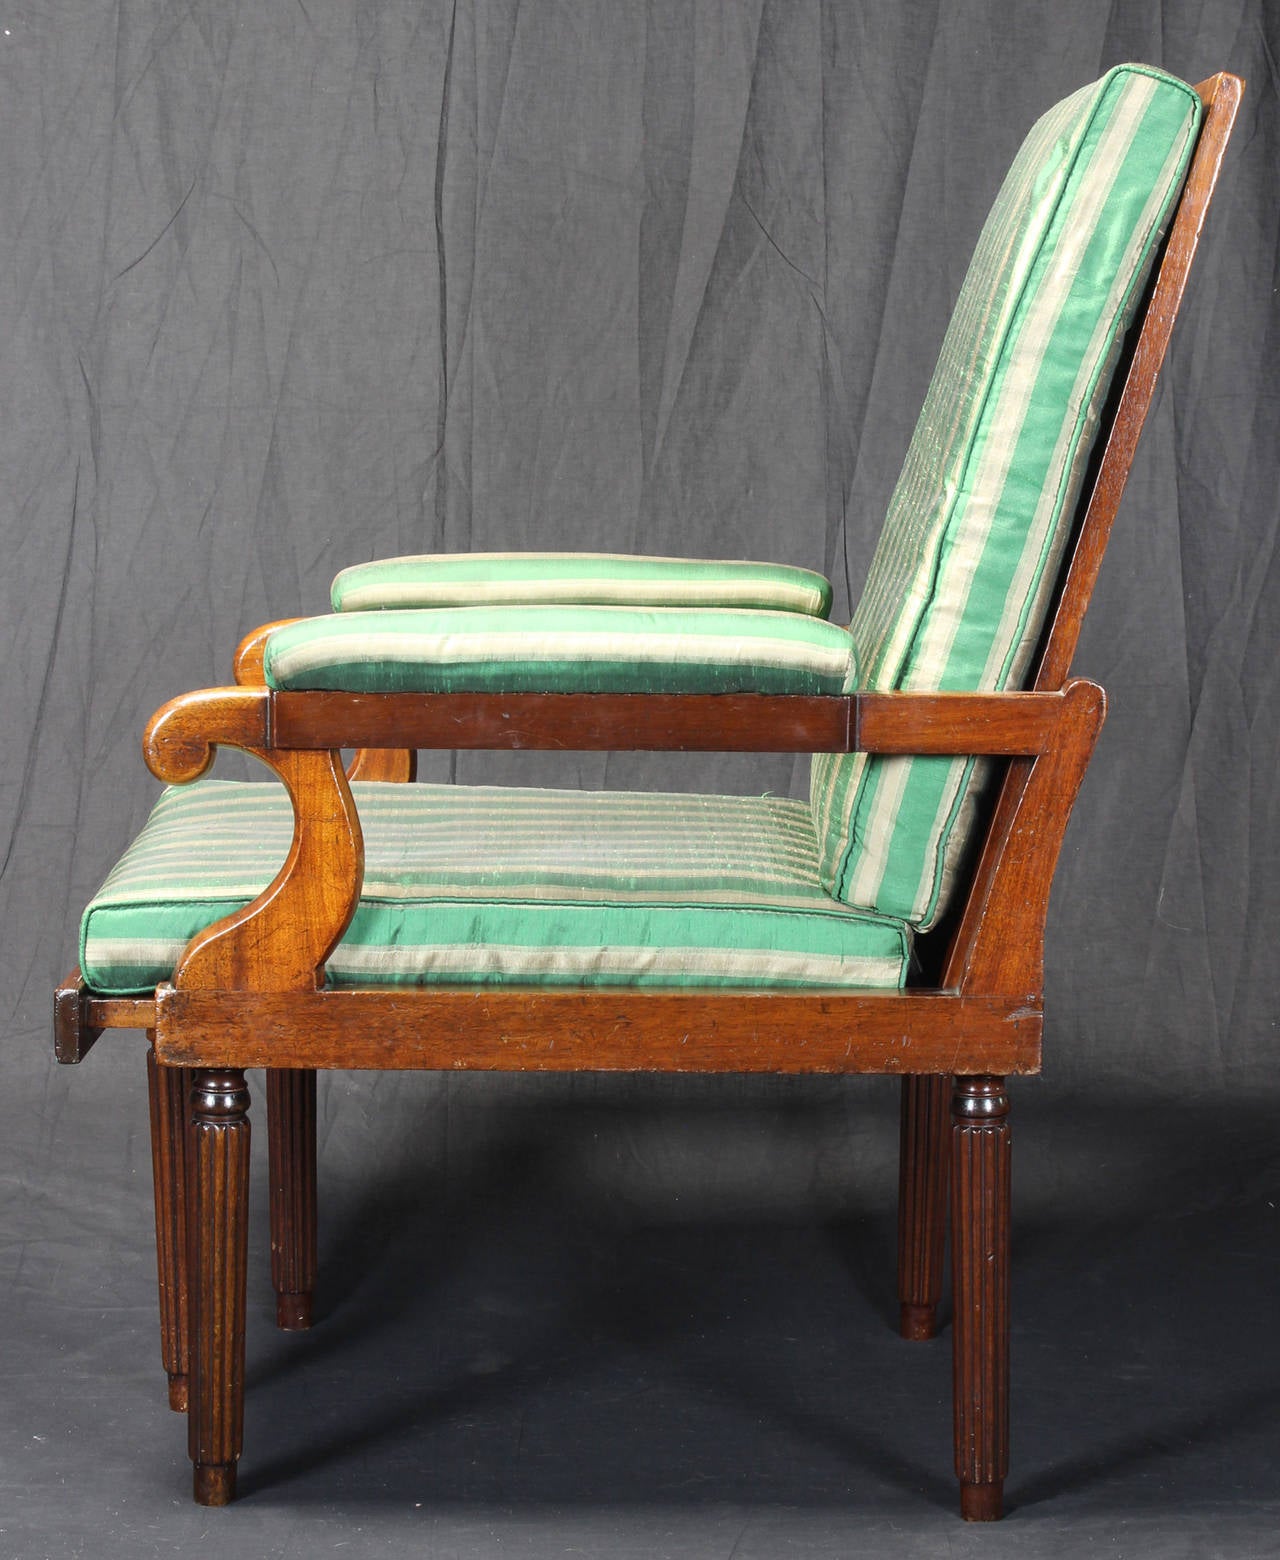 Early 19th Century 19th Century English Campaign Chair For Sale